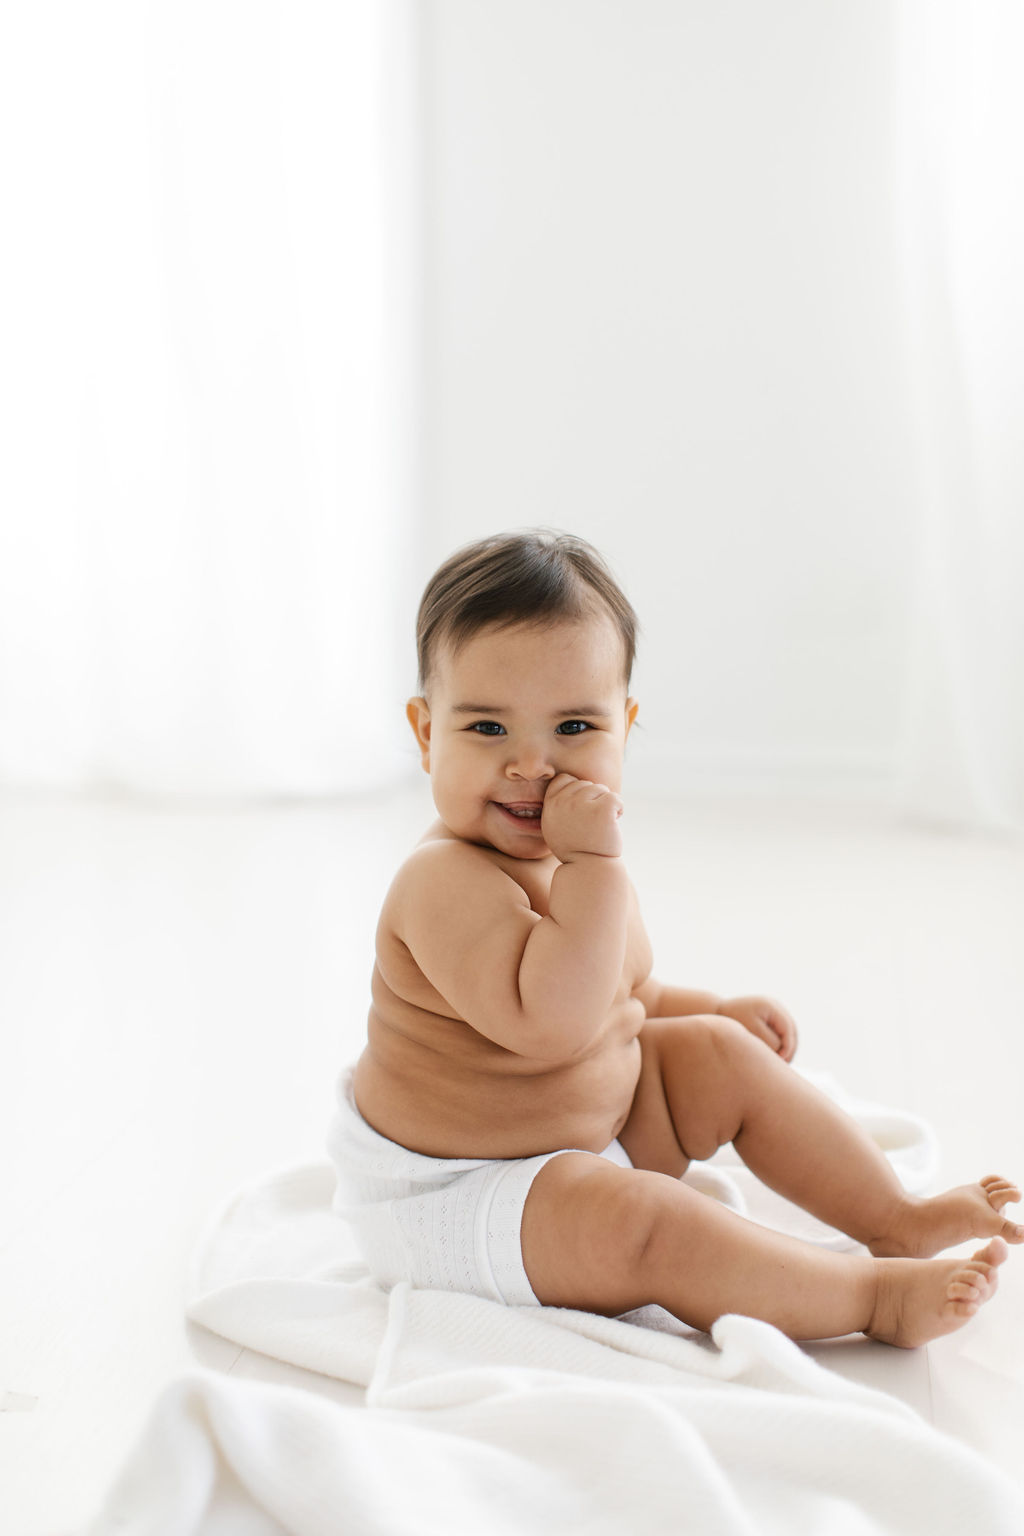 photograph of baby sitting in a white simple studio during baby's first birthday sessions